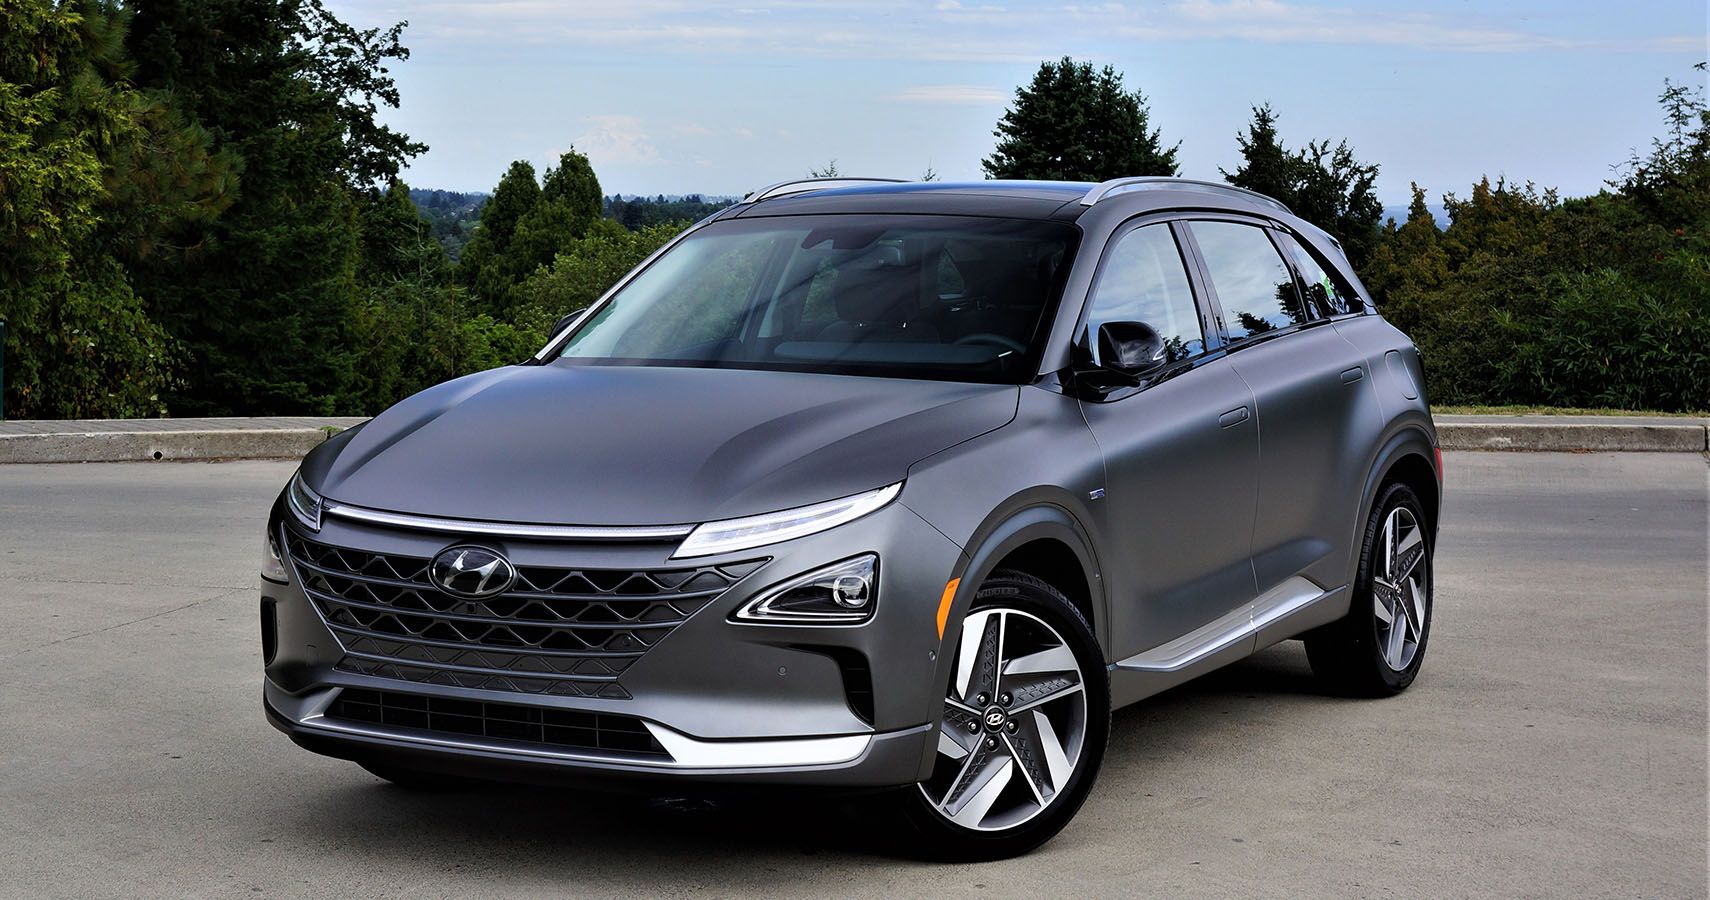 2021 Hyundai Nexo Fuel Cell Review: The Most Advanced Production SUV